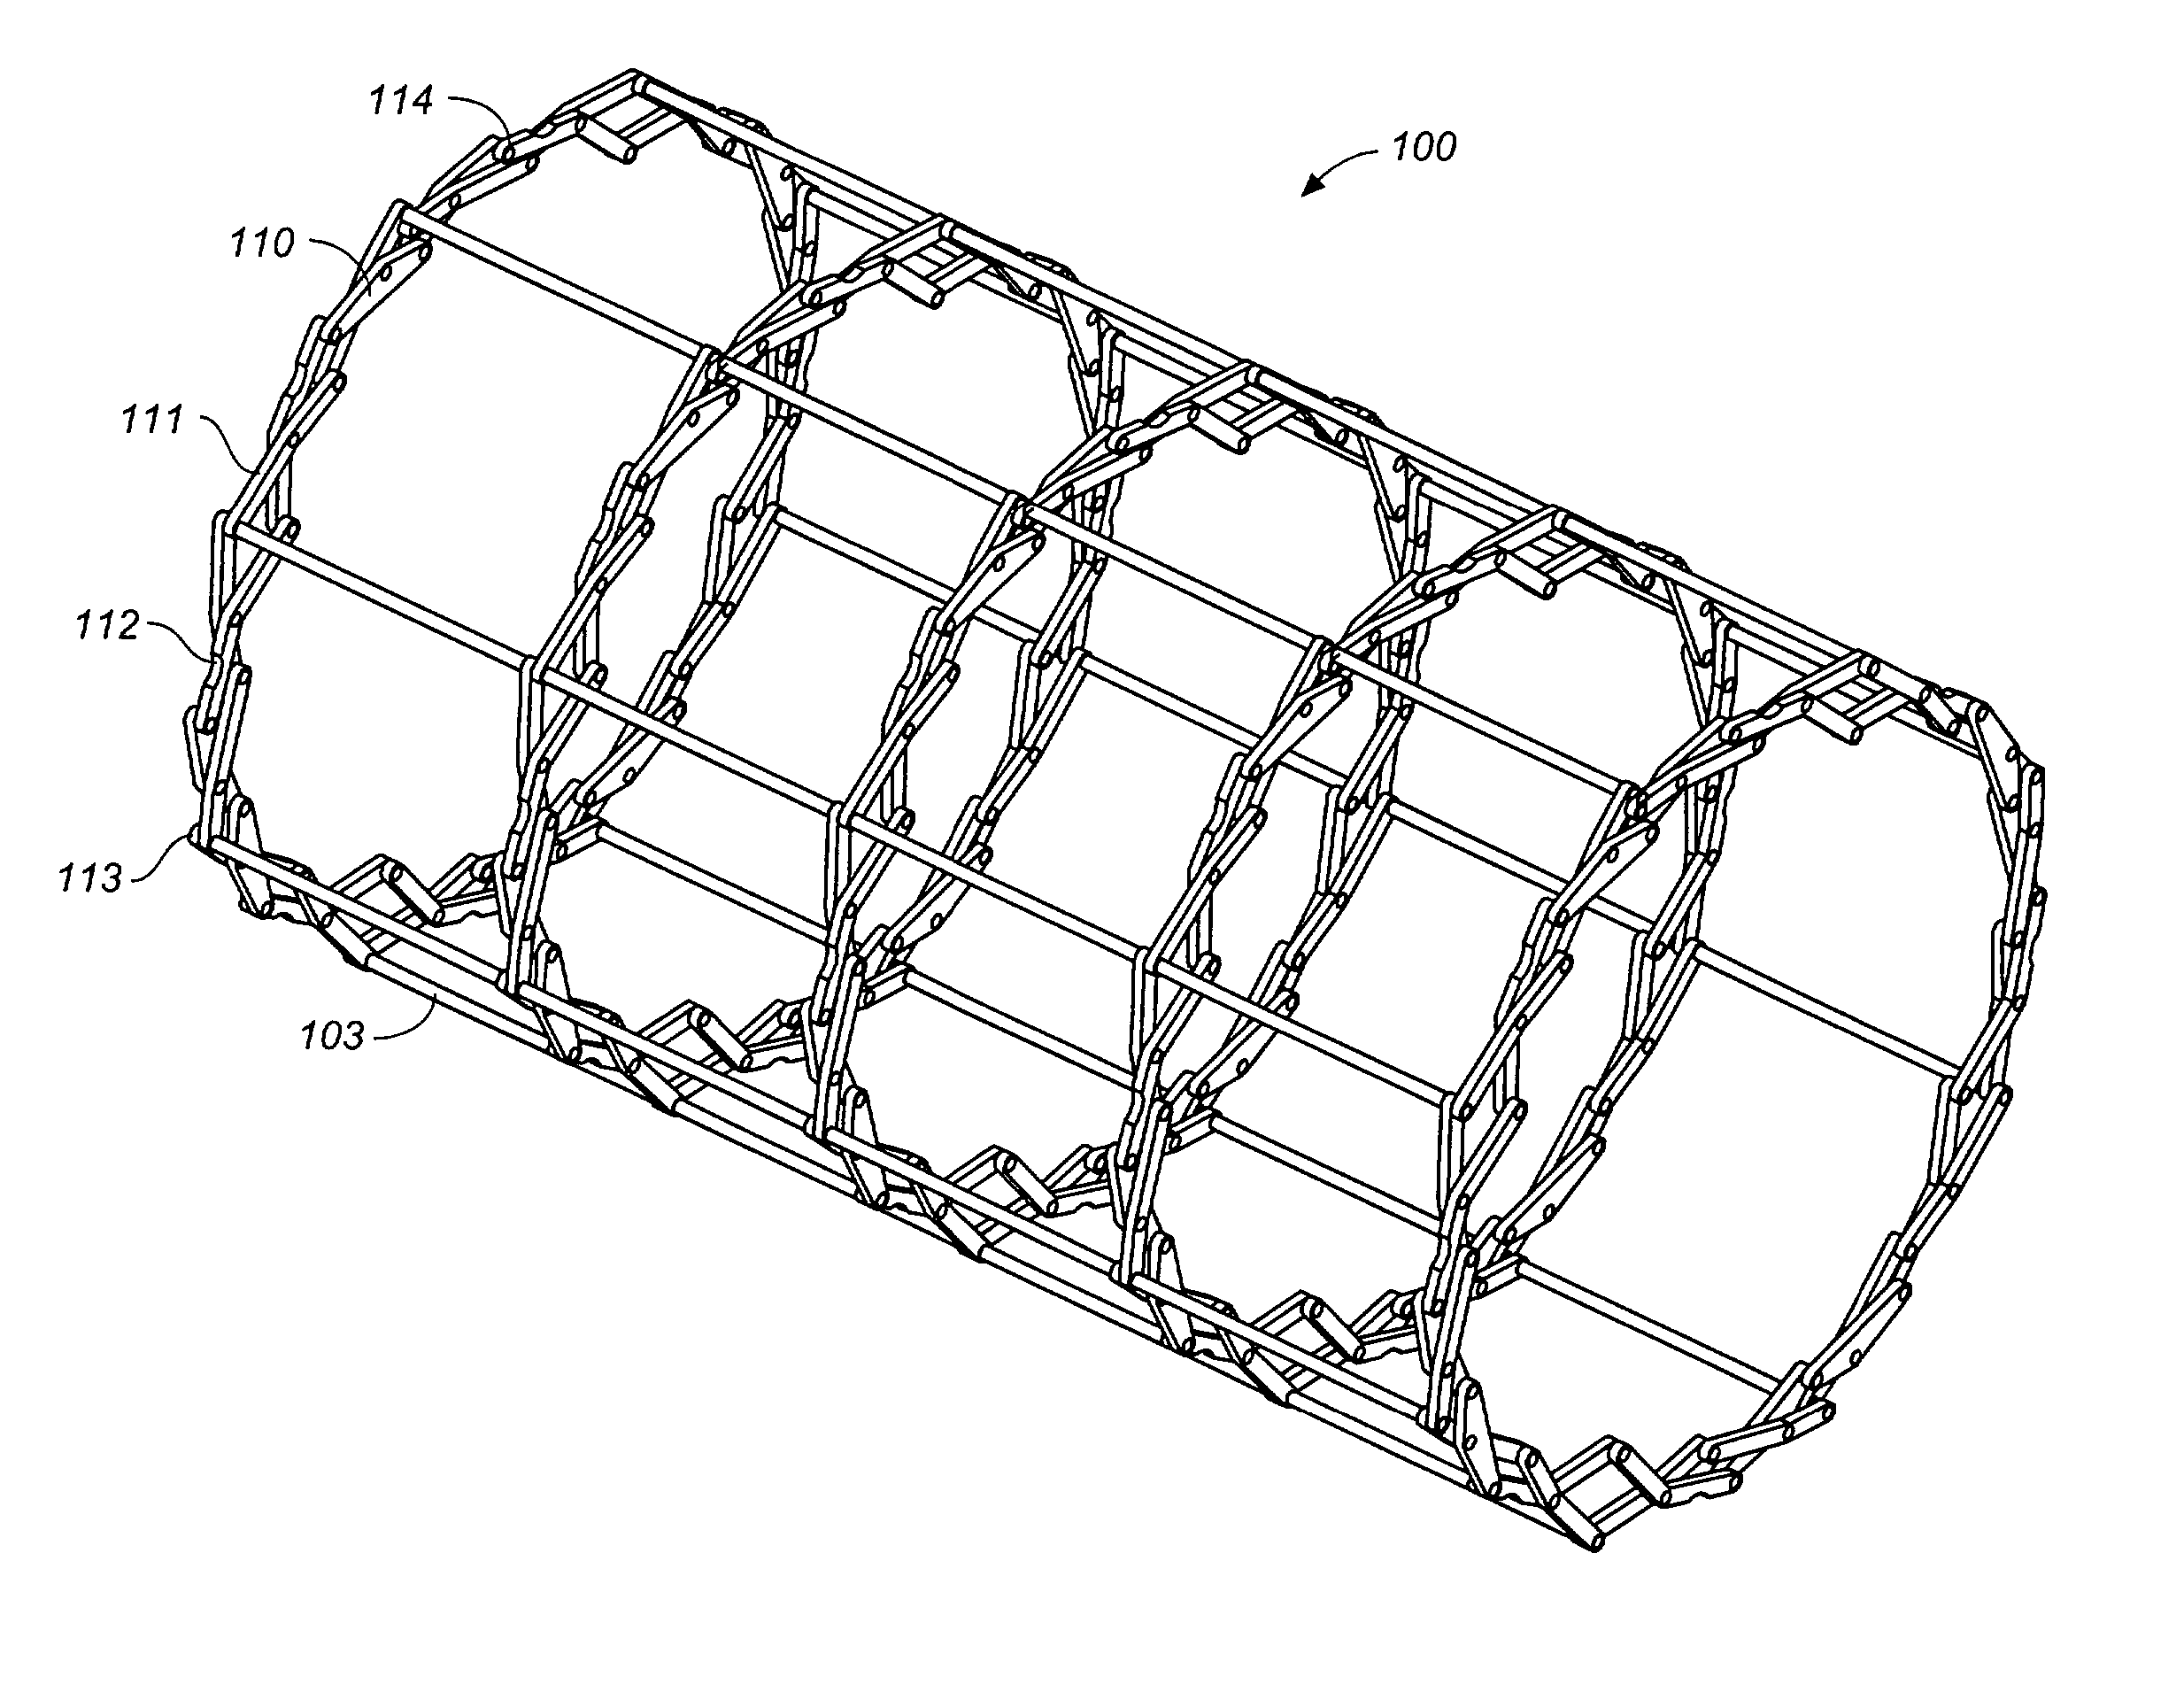 Flexible MEMS actuated controlled expansion stent